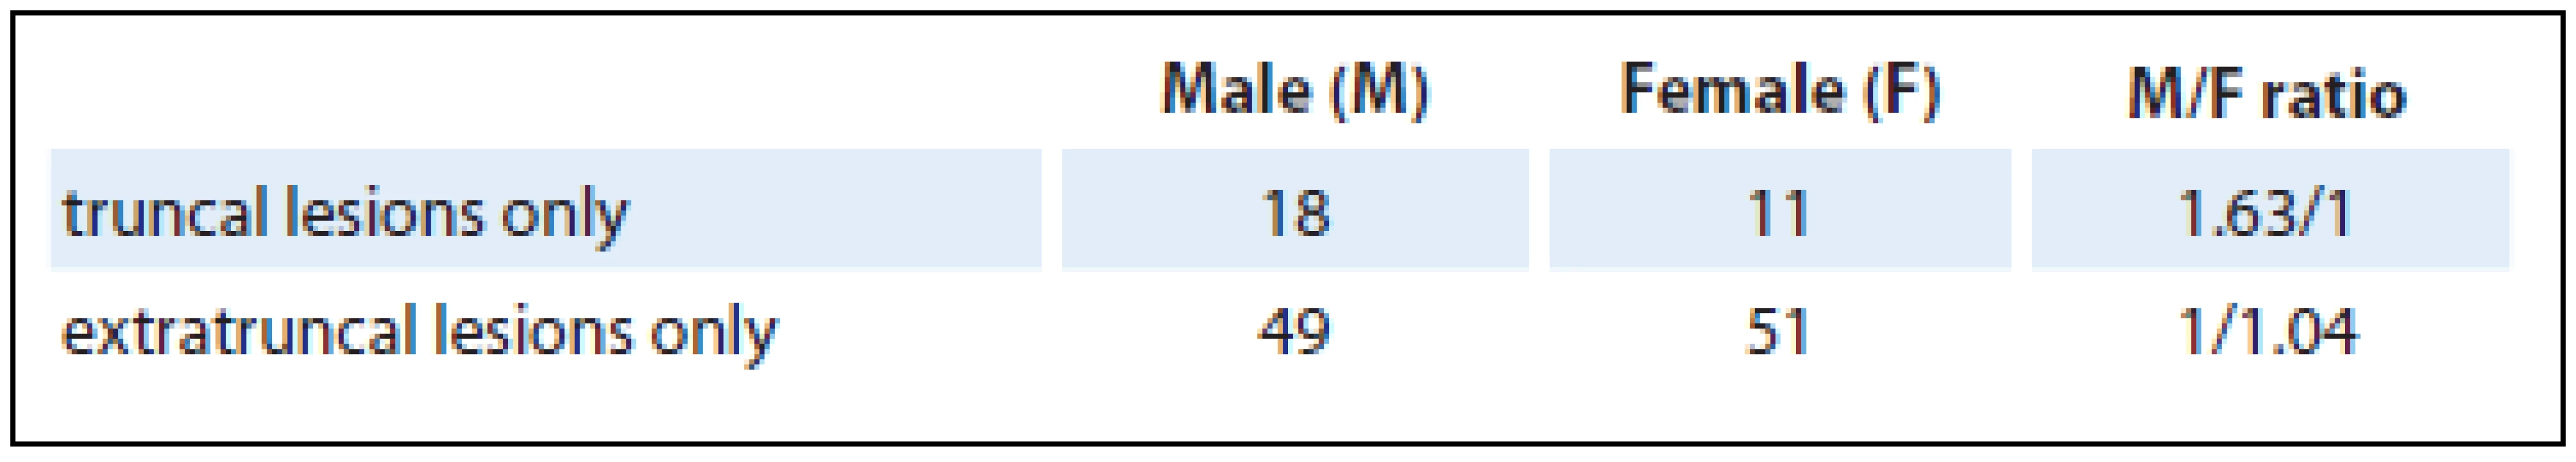 Gender distribution of patients having multiple BCCs divided into “truncal lesions only” and “extratruncal lesions only” cathegories.